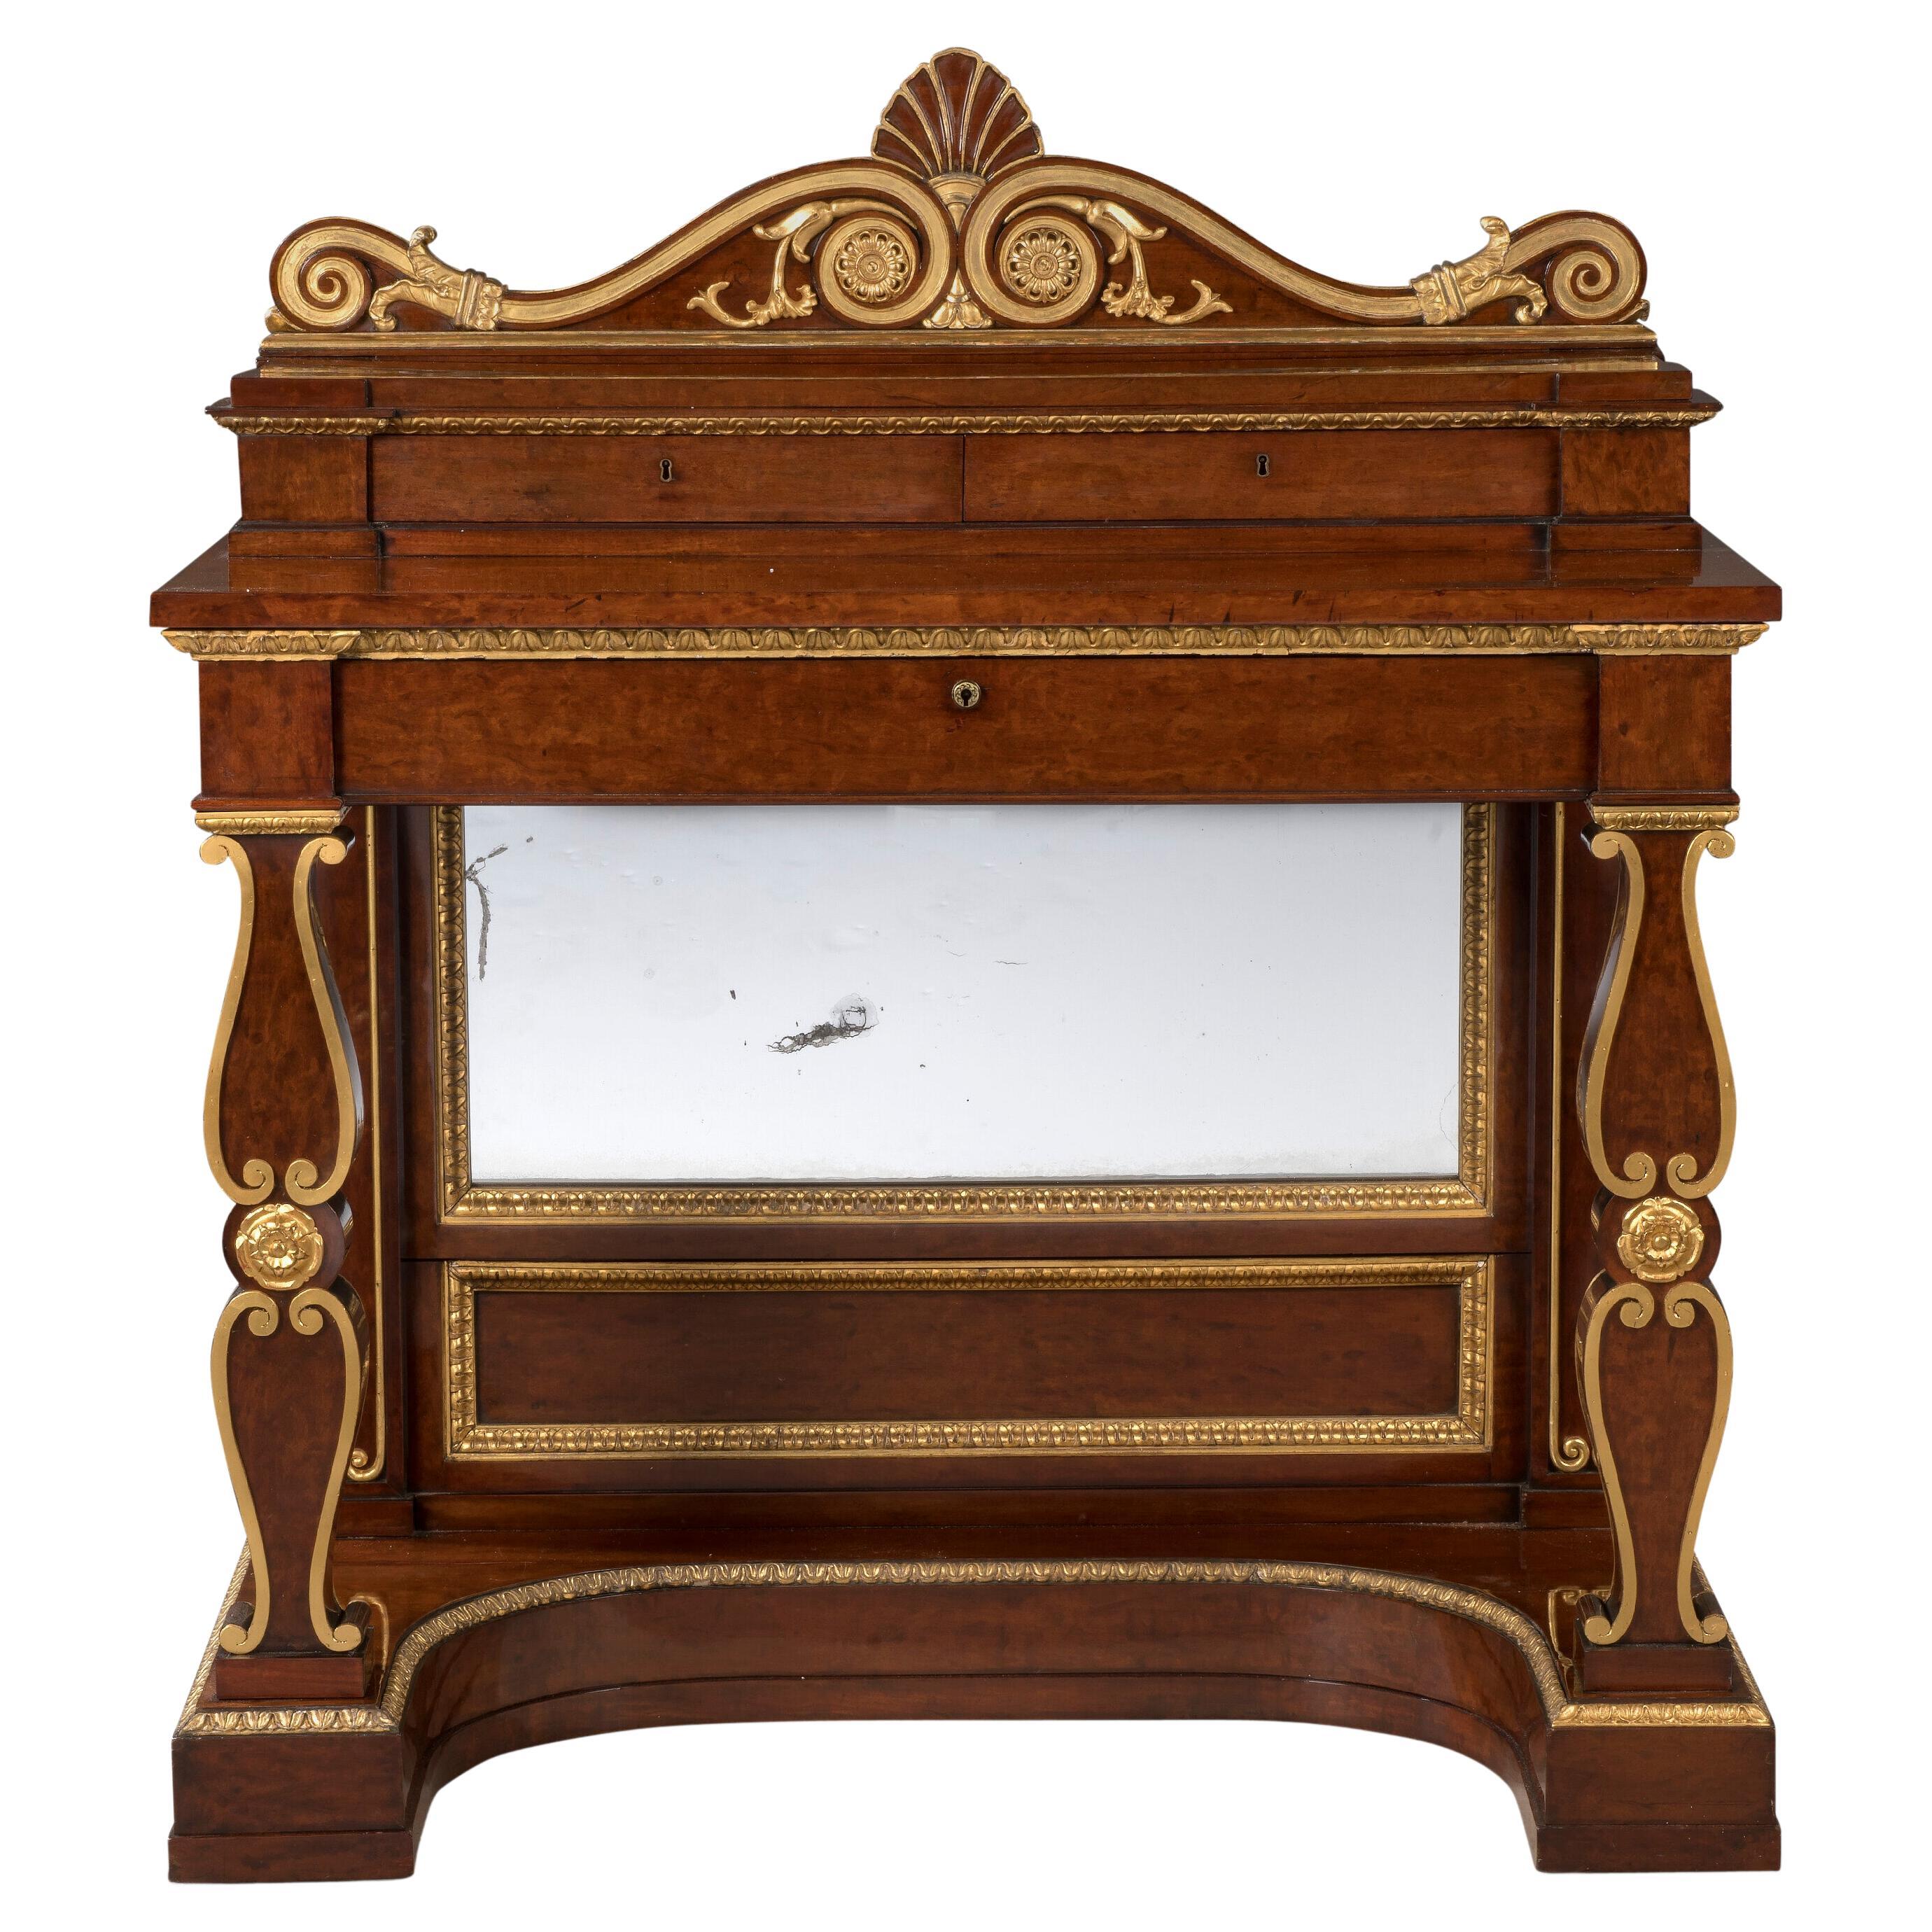  An Exceptional English Regency Dressing Table with a Royal Family Provenance